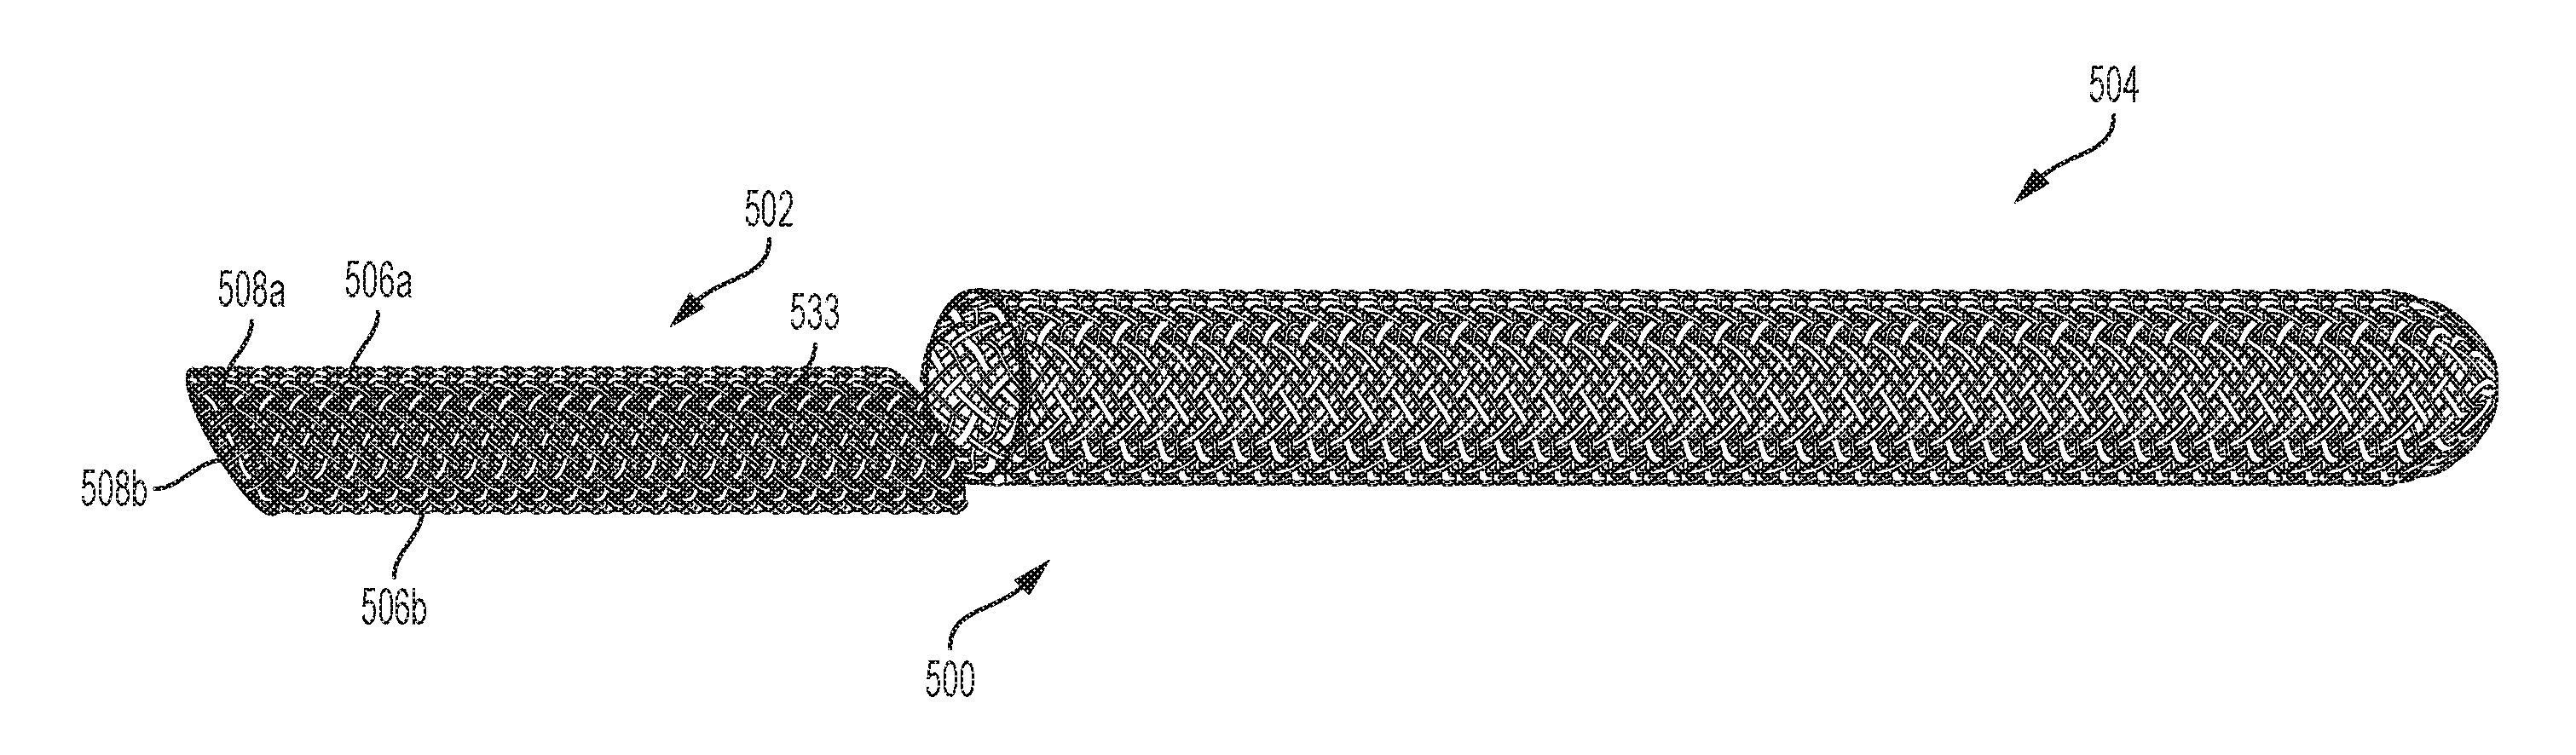 Devices, systems and methods for use in bone tissue